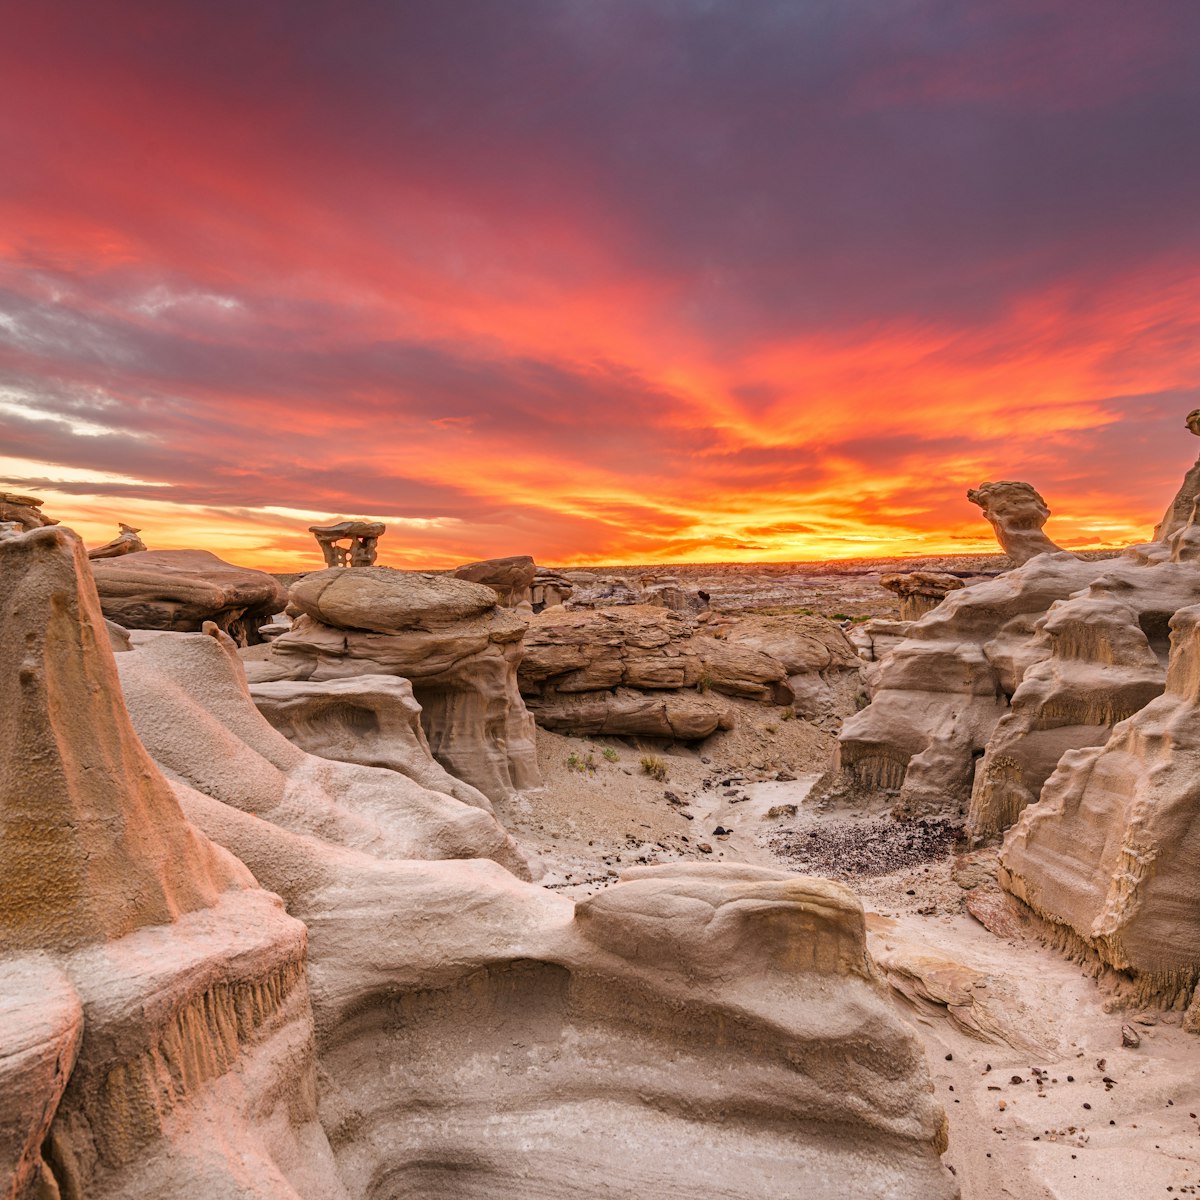 Just after sunset in Bisti/De-Na-Zin Wilderness, New Mexico.
